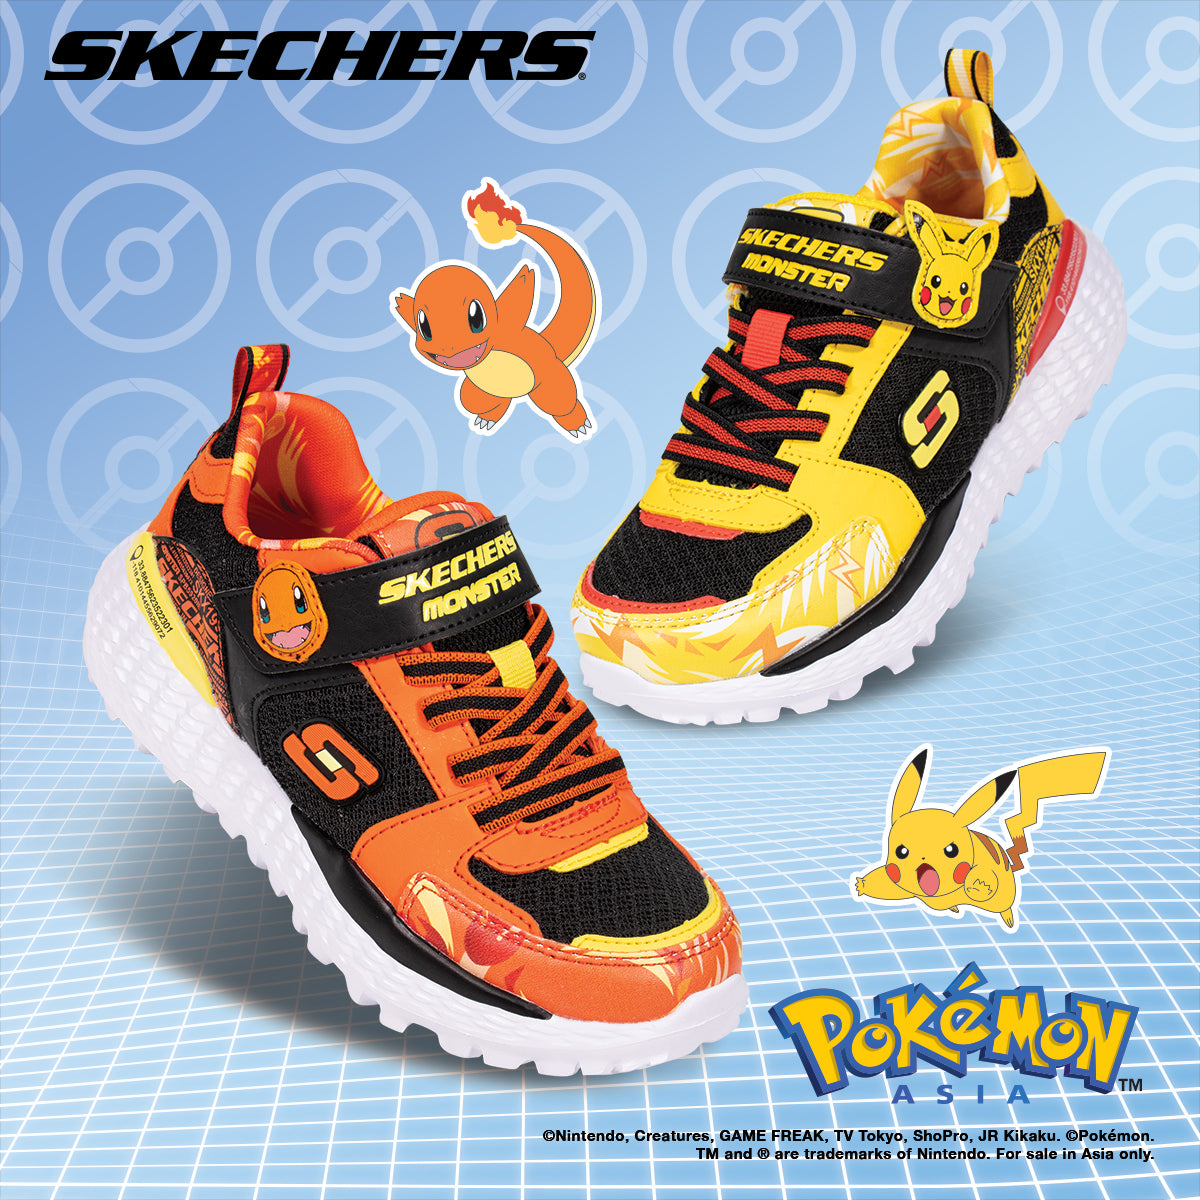 Pokémon Collection by Skechers – Skechers Singapore Store